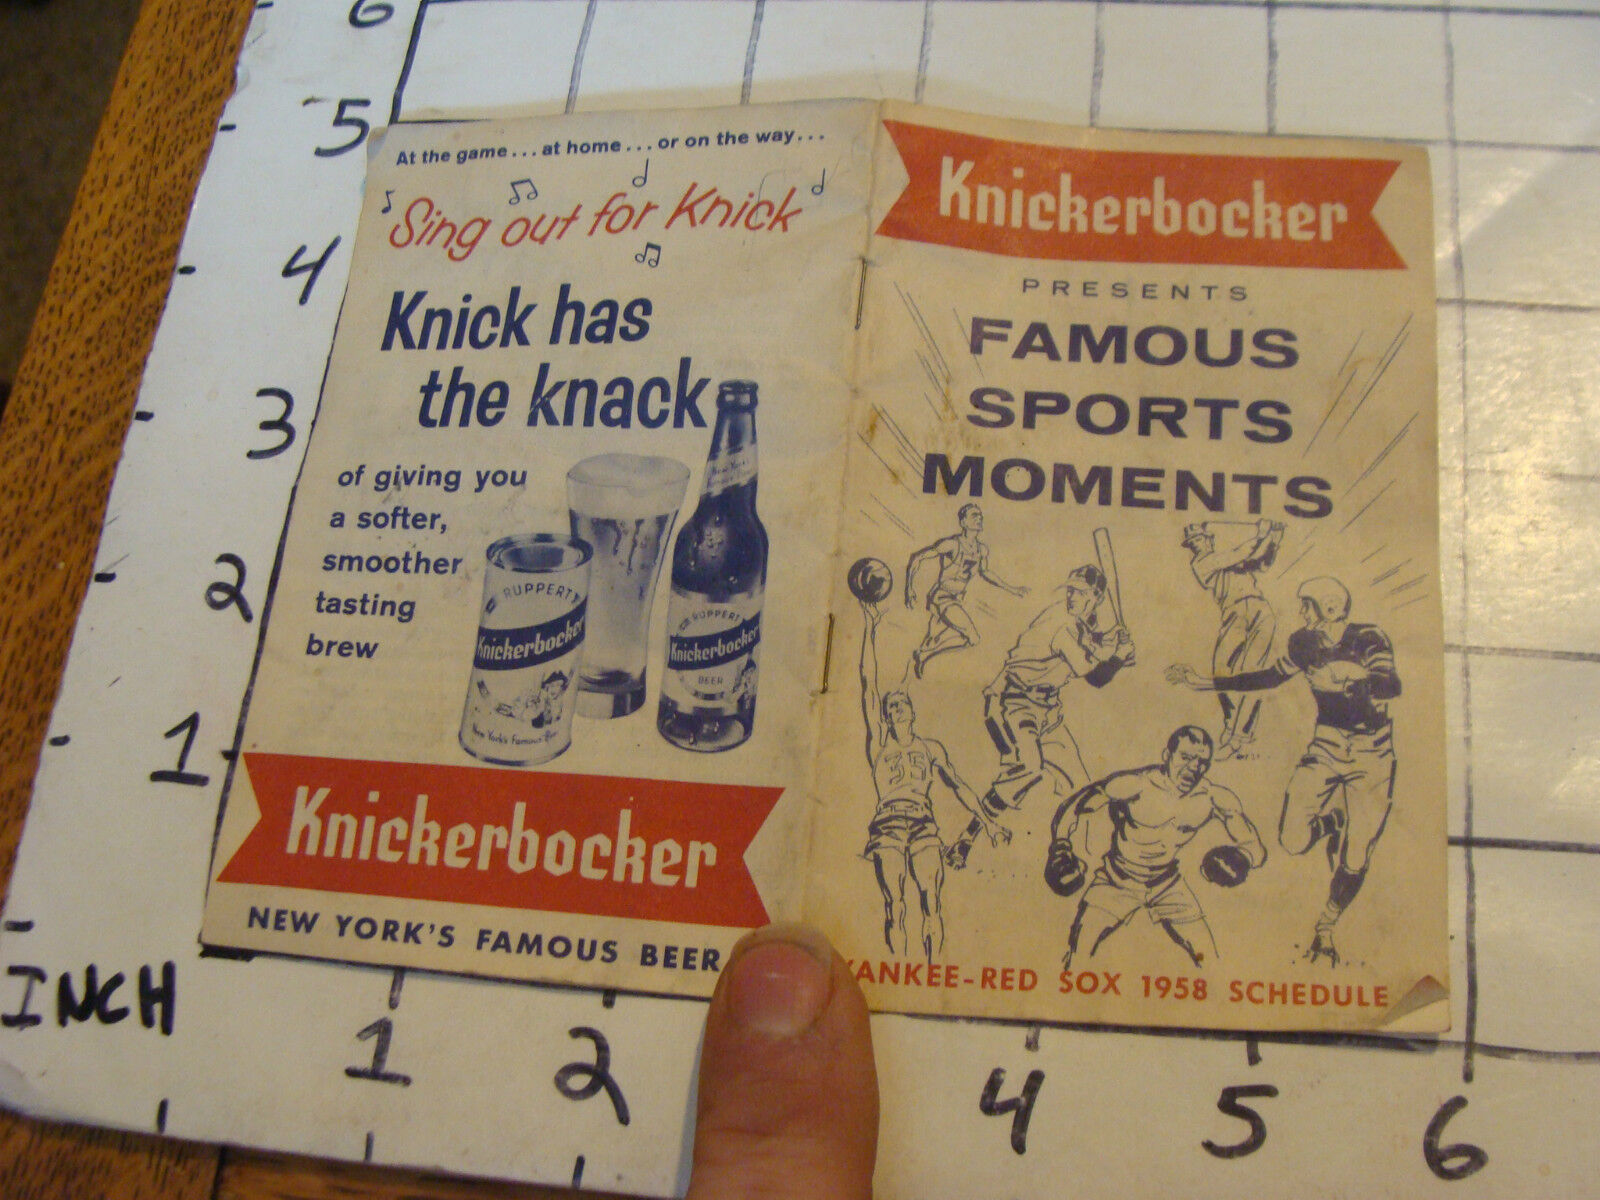 Knickerbocker--1958 YANKEE-RED SOX SCHEDUE plus famous sports moments etc